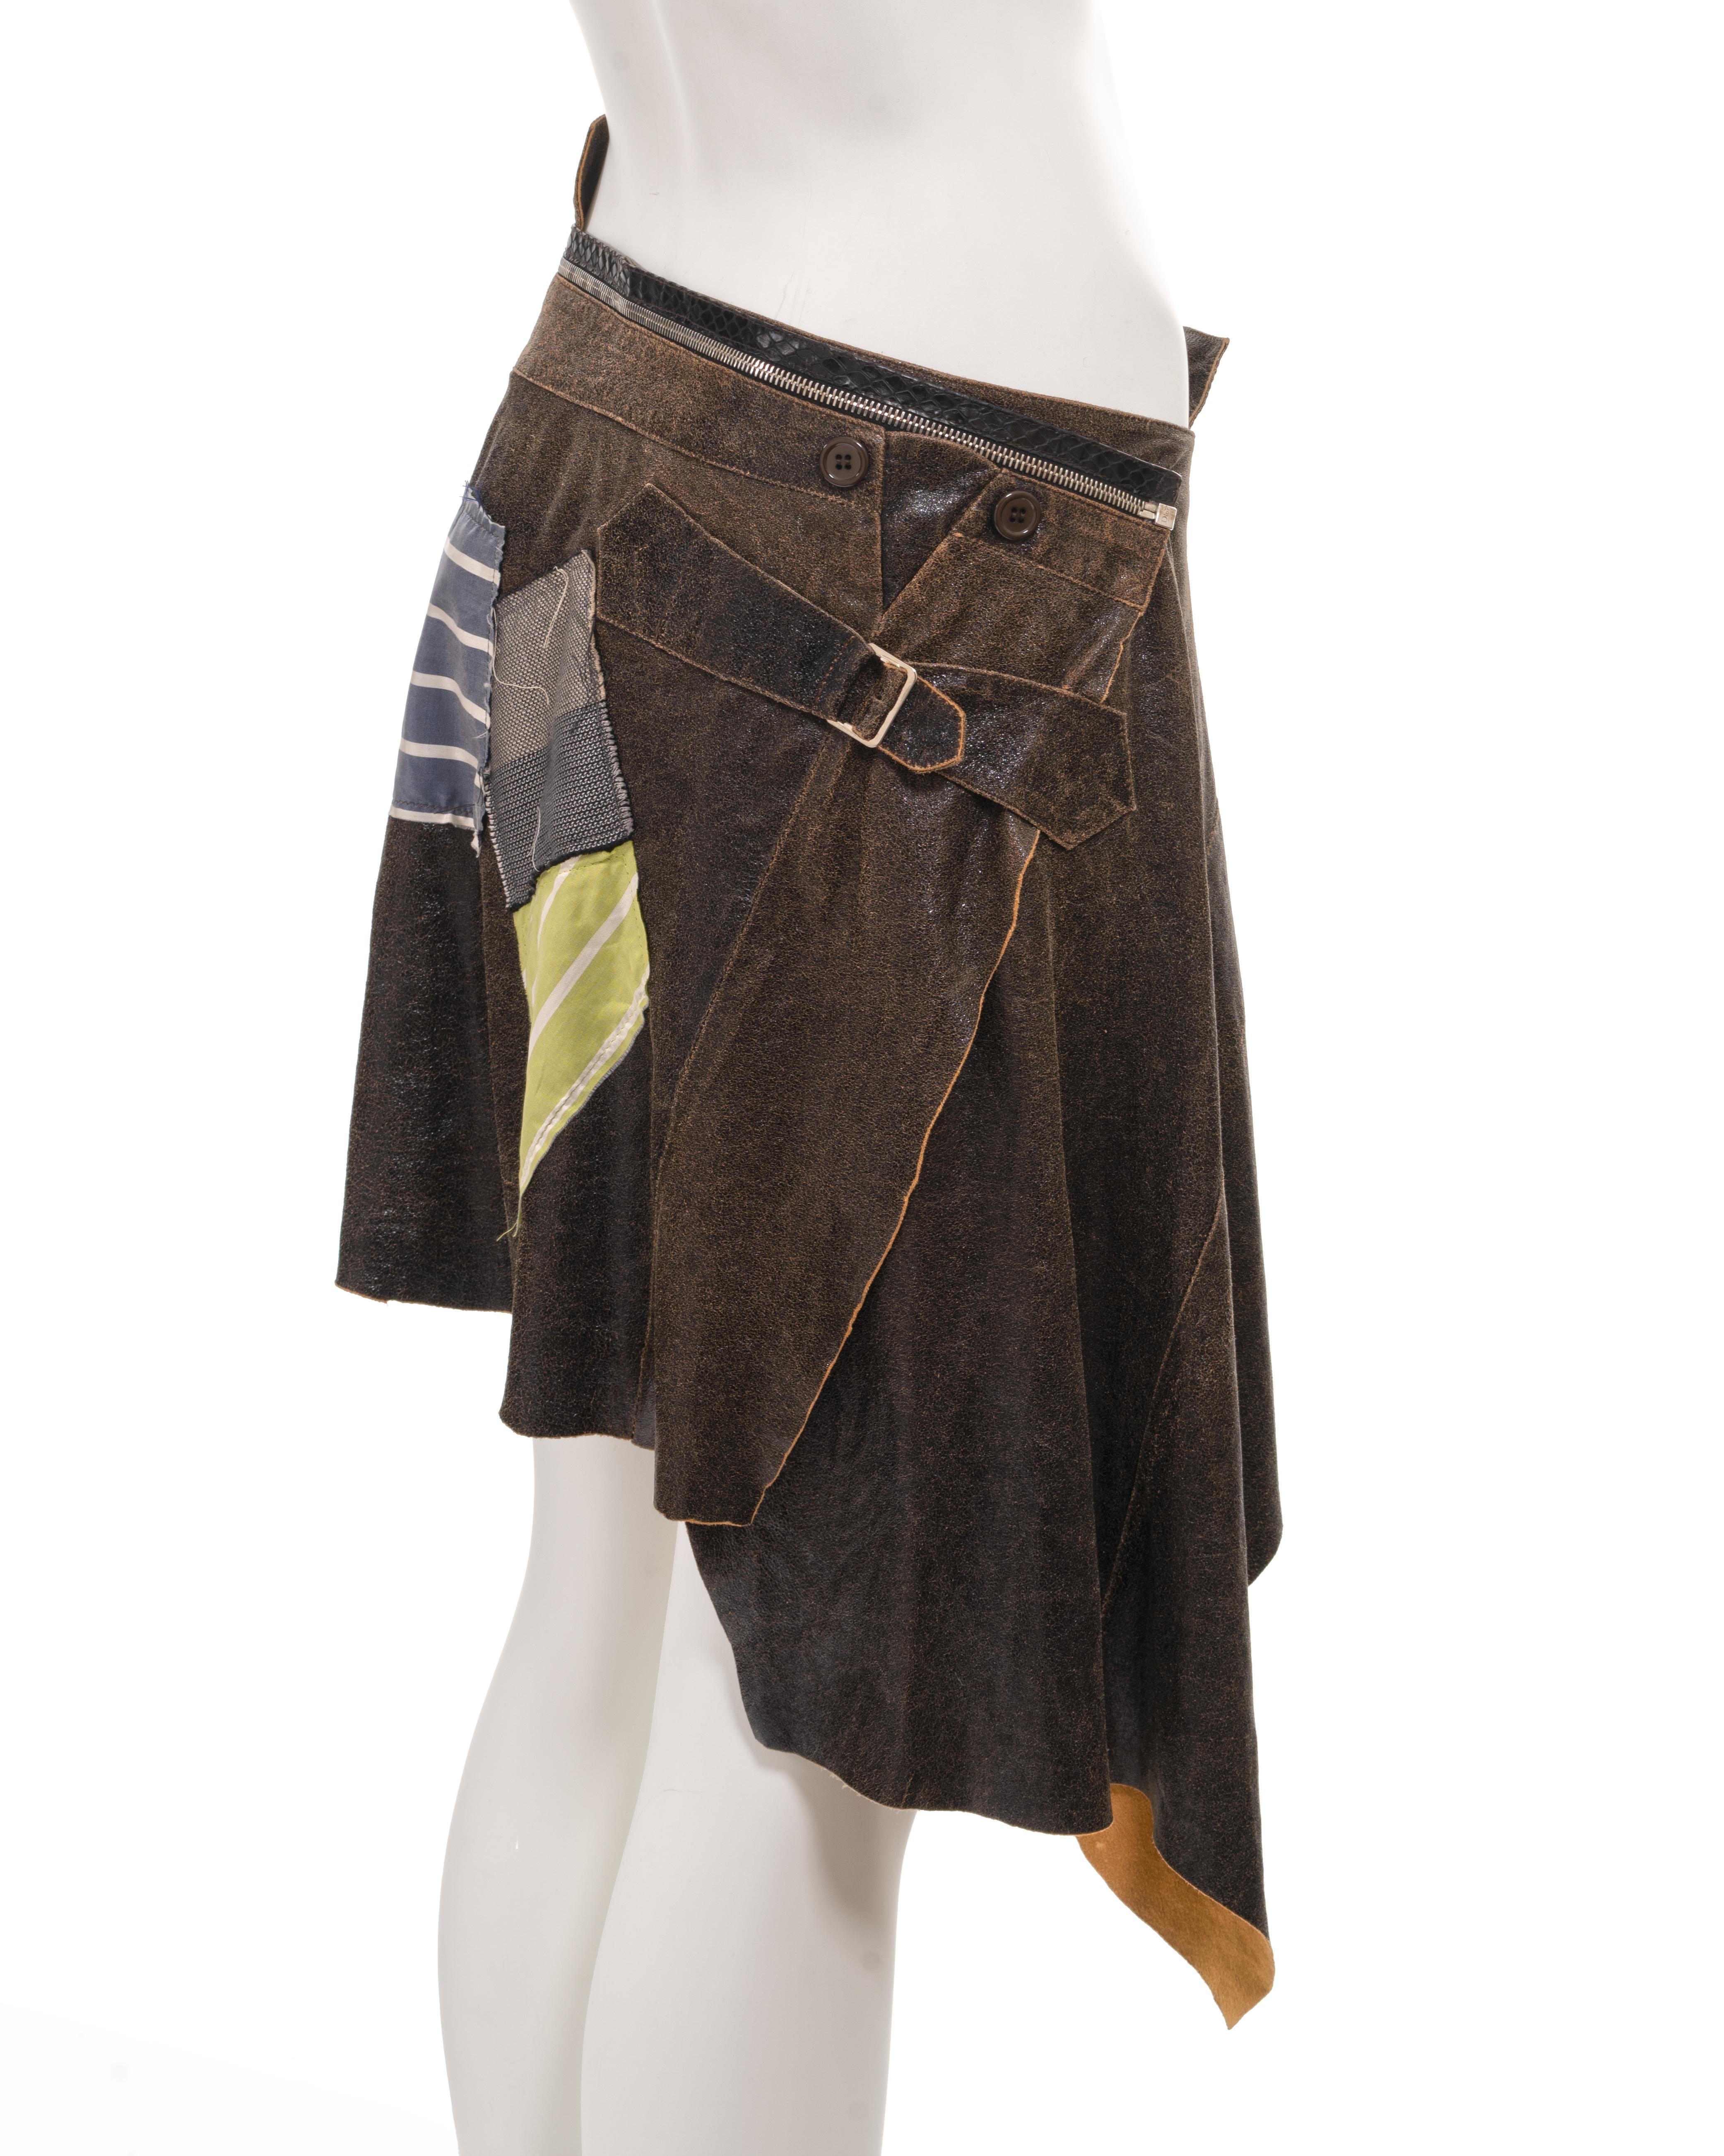 Christian Dior by John Galliano deconstructed brown leather wrap skirt, ss 2001 For Sale 6